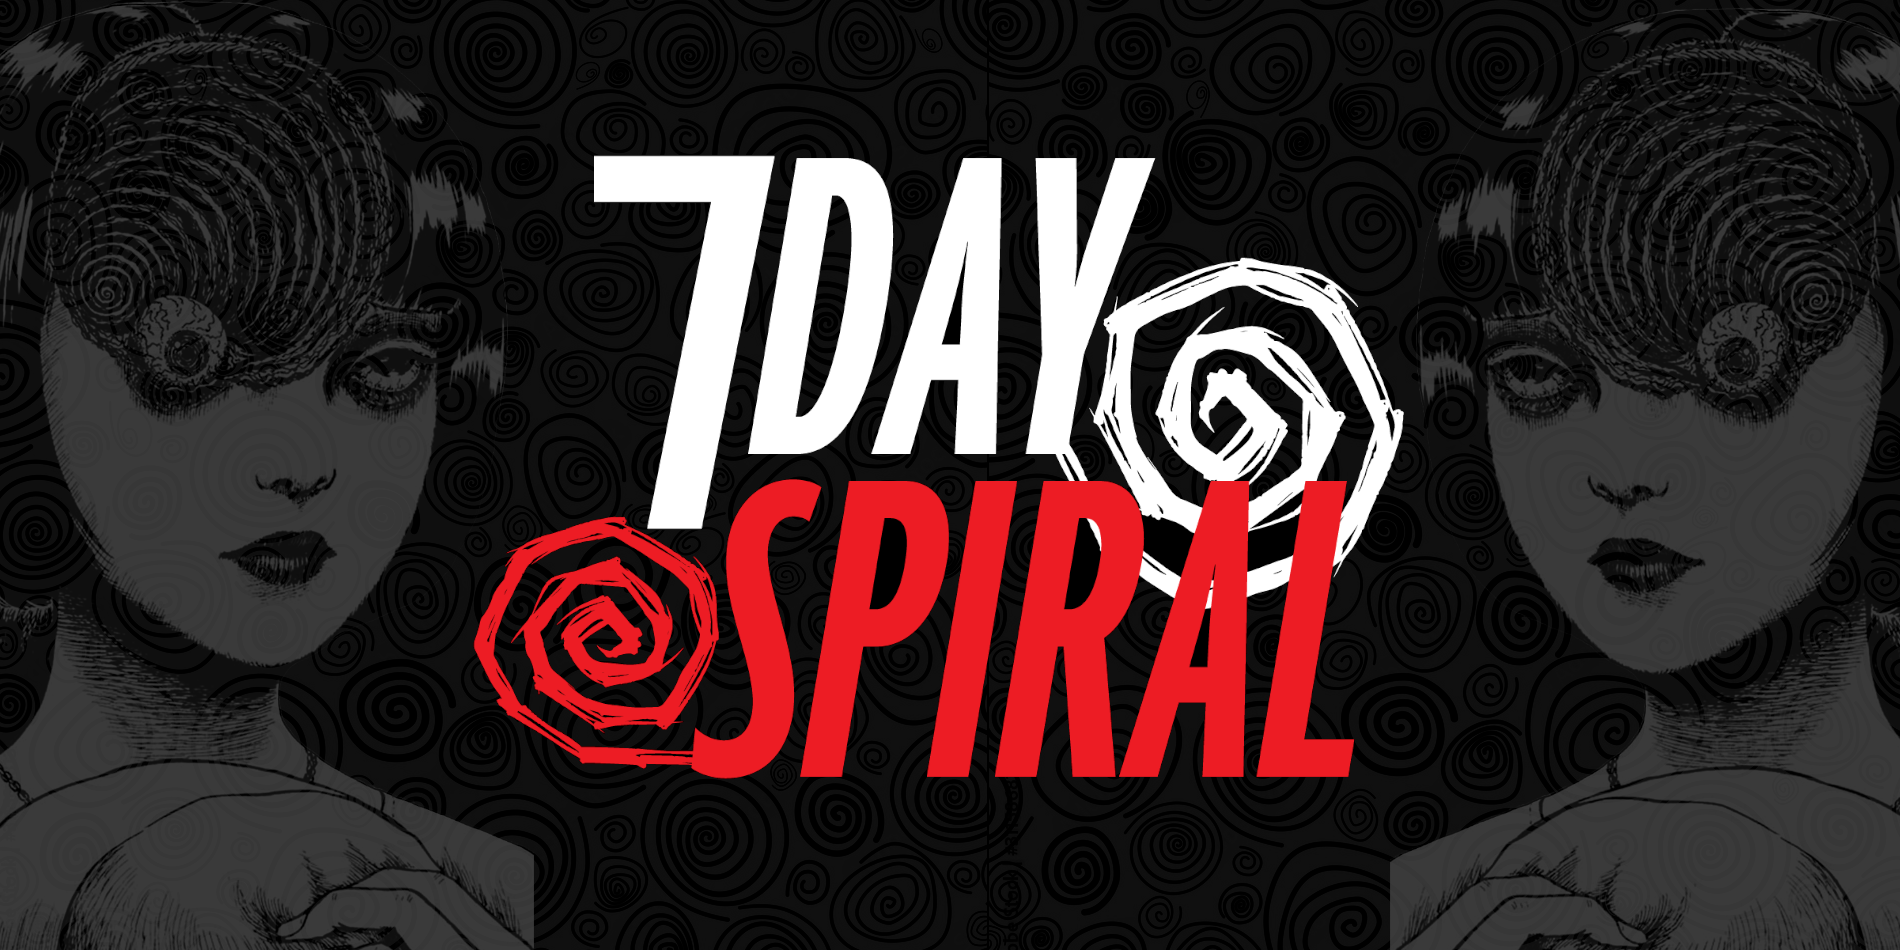 7 Day Spiral Featured Image